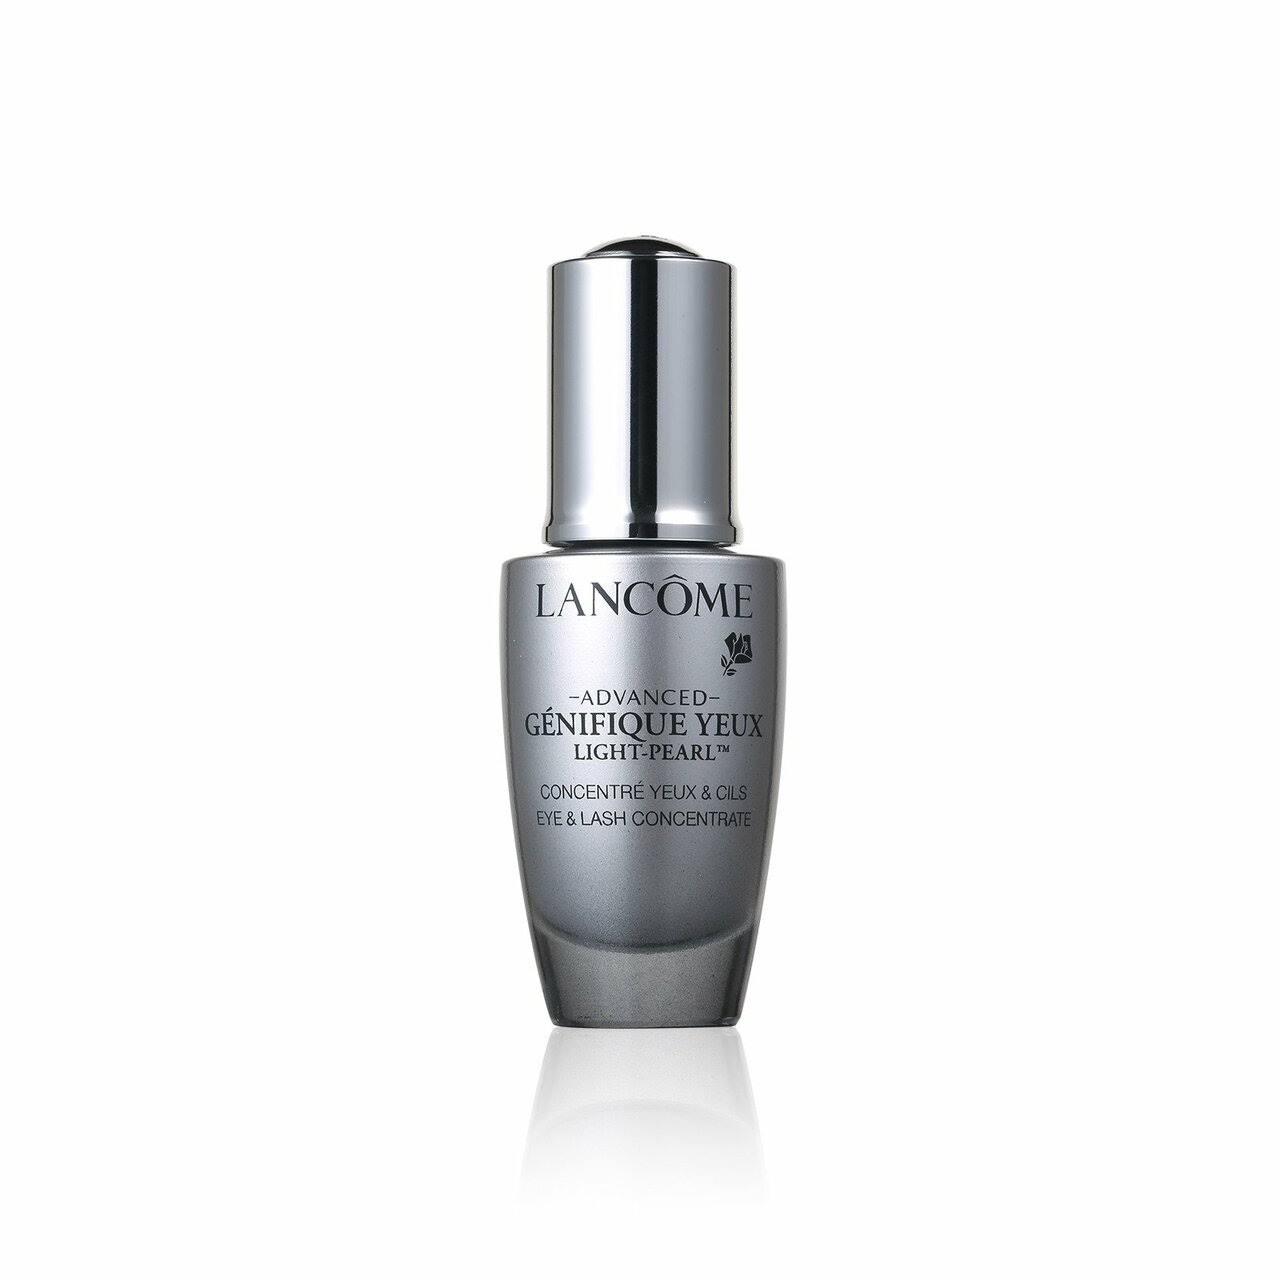 Lancome - Genifique Yeux Advanced Light-Pearl Youth Activating Eye & Lash Concentrate 20ml / 0.67oz